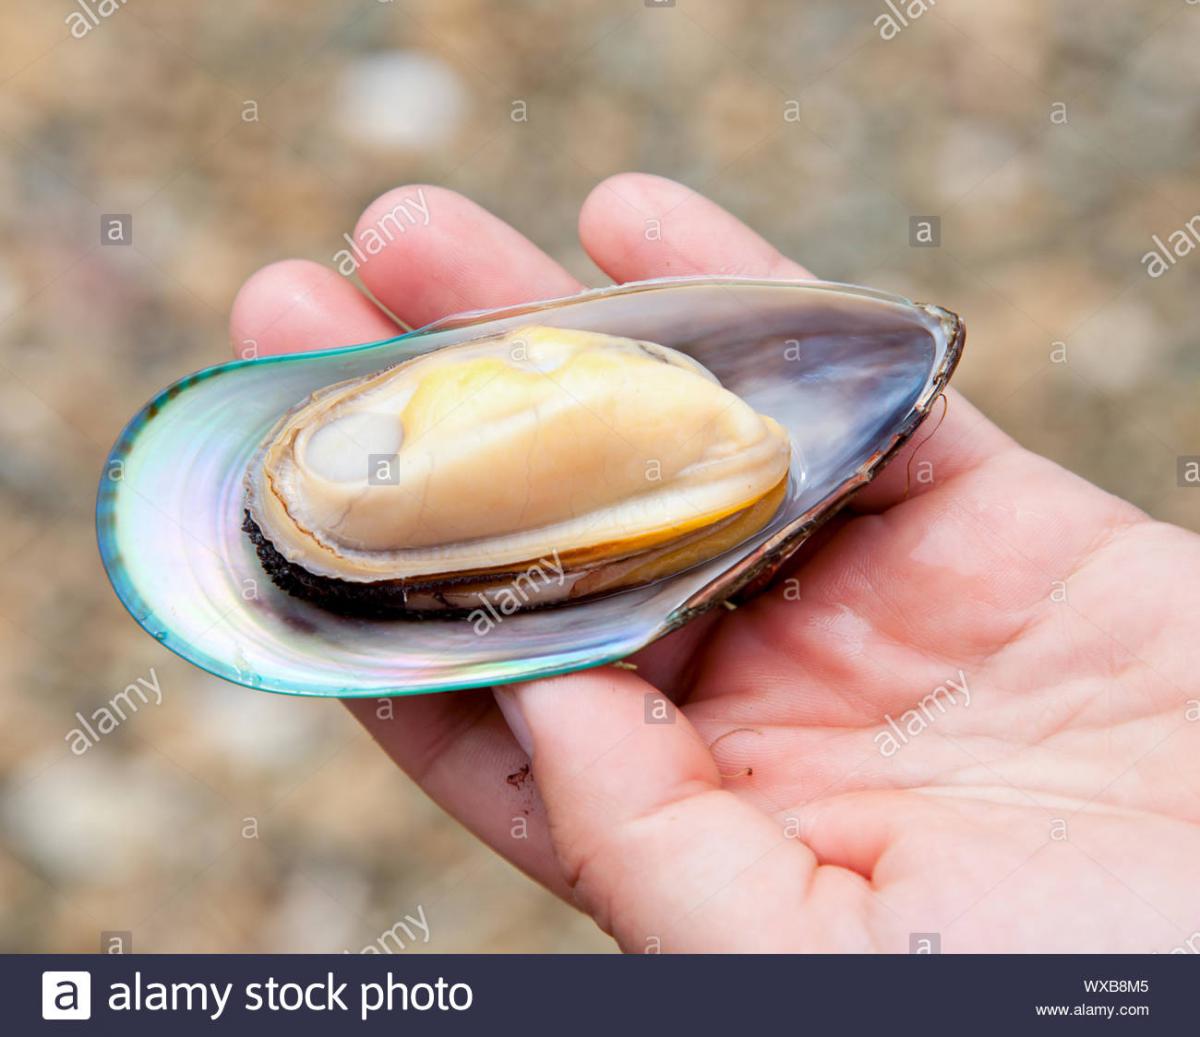 hand-holding-freshly-cooked-new-zealand-green-lipped-mussel-WXB8M5[1].jpg